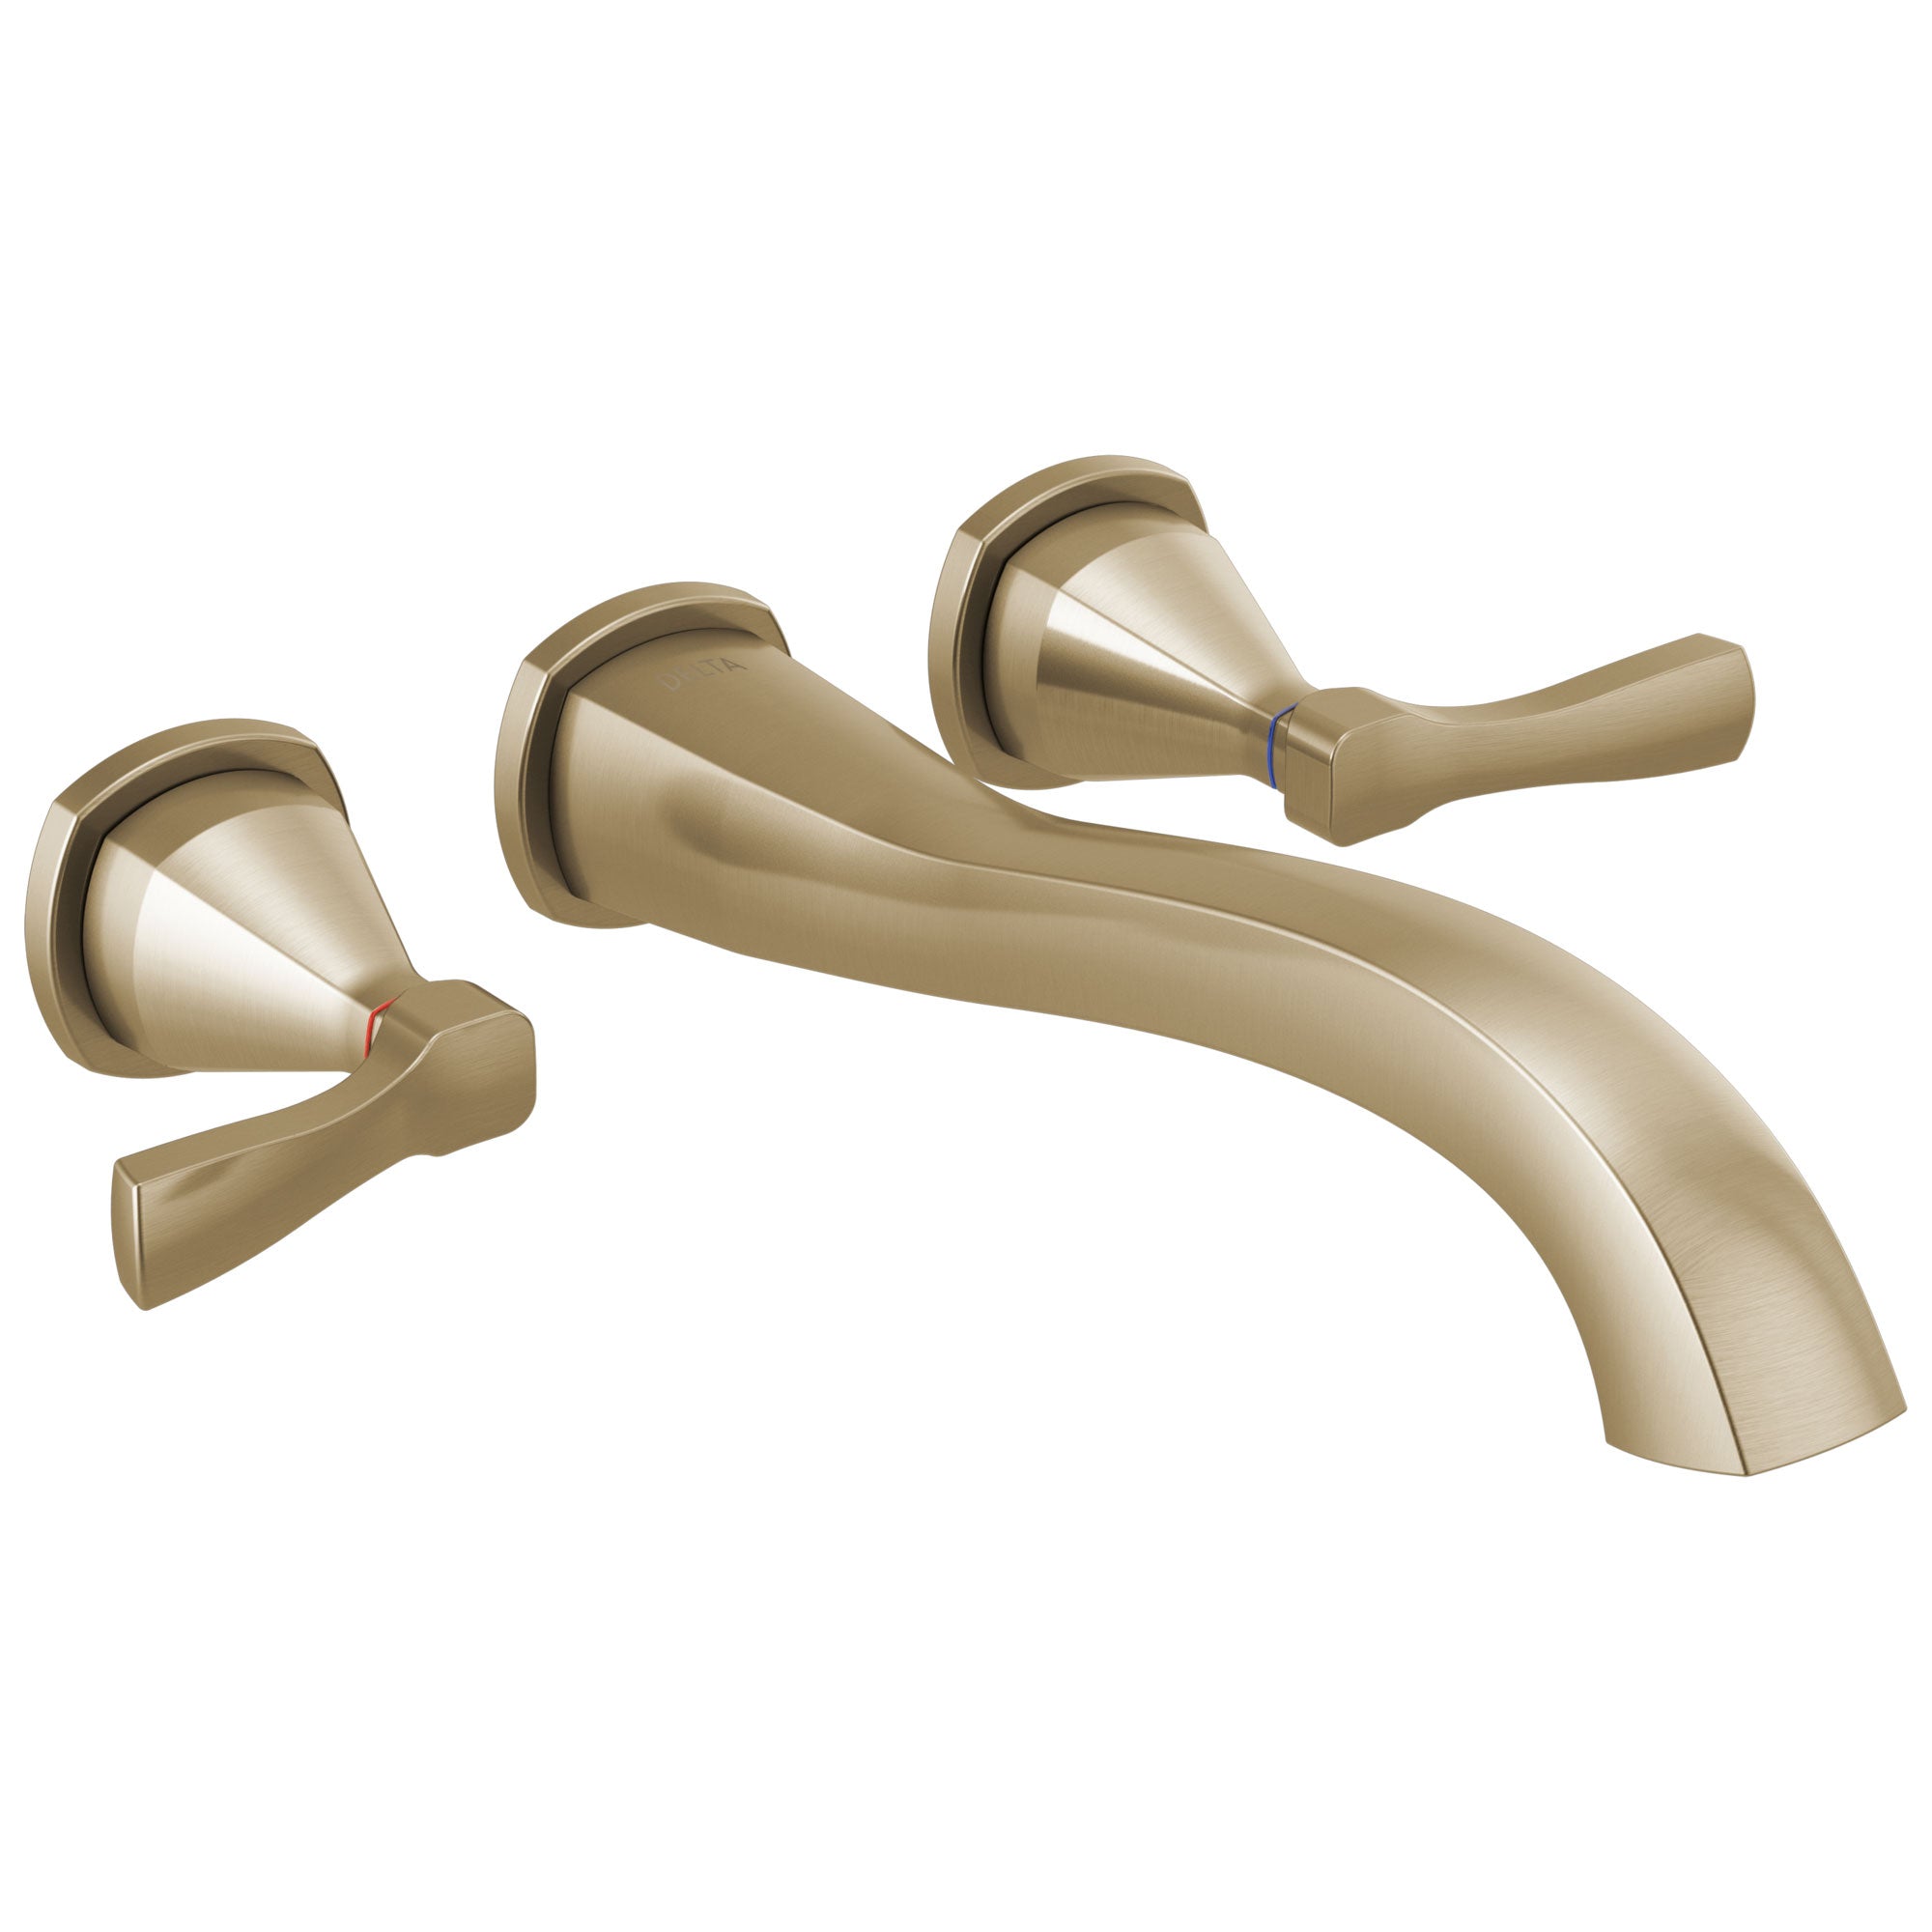 Delta Stryke Champagne Bronze Finish Wall Mounted Tub Filler Faucet Trim Kit (Requires Valve) DT5776CZWL